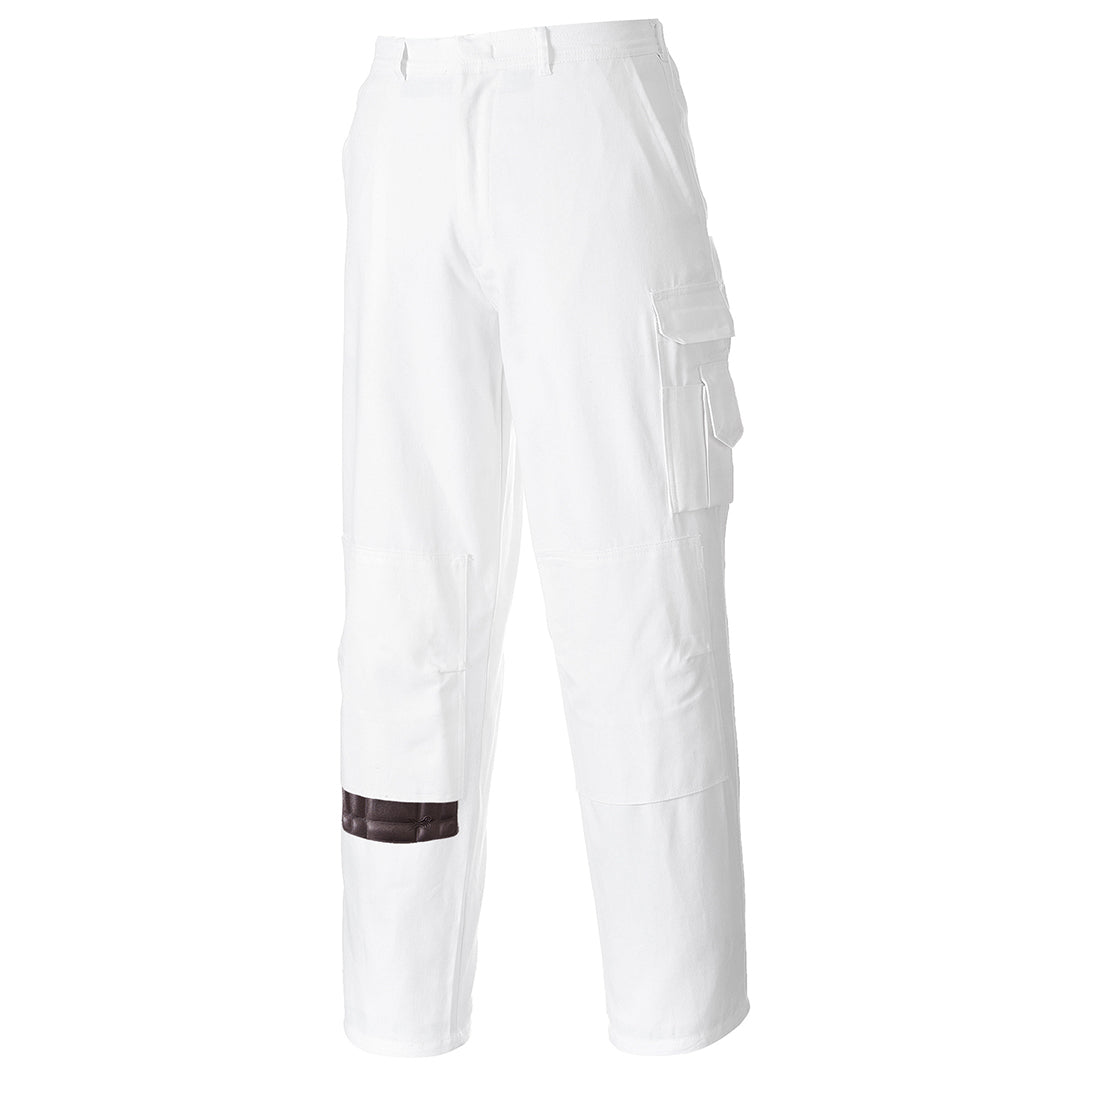 Portwest S817 Protective Cotton Painters Elasticated Pants with 7 Pockets - New England Safety Supply